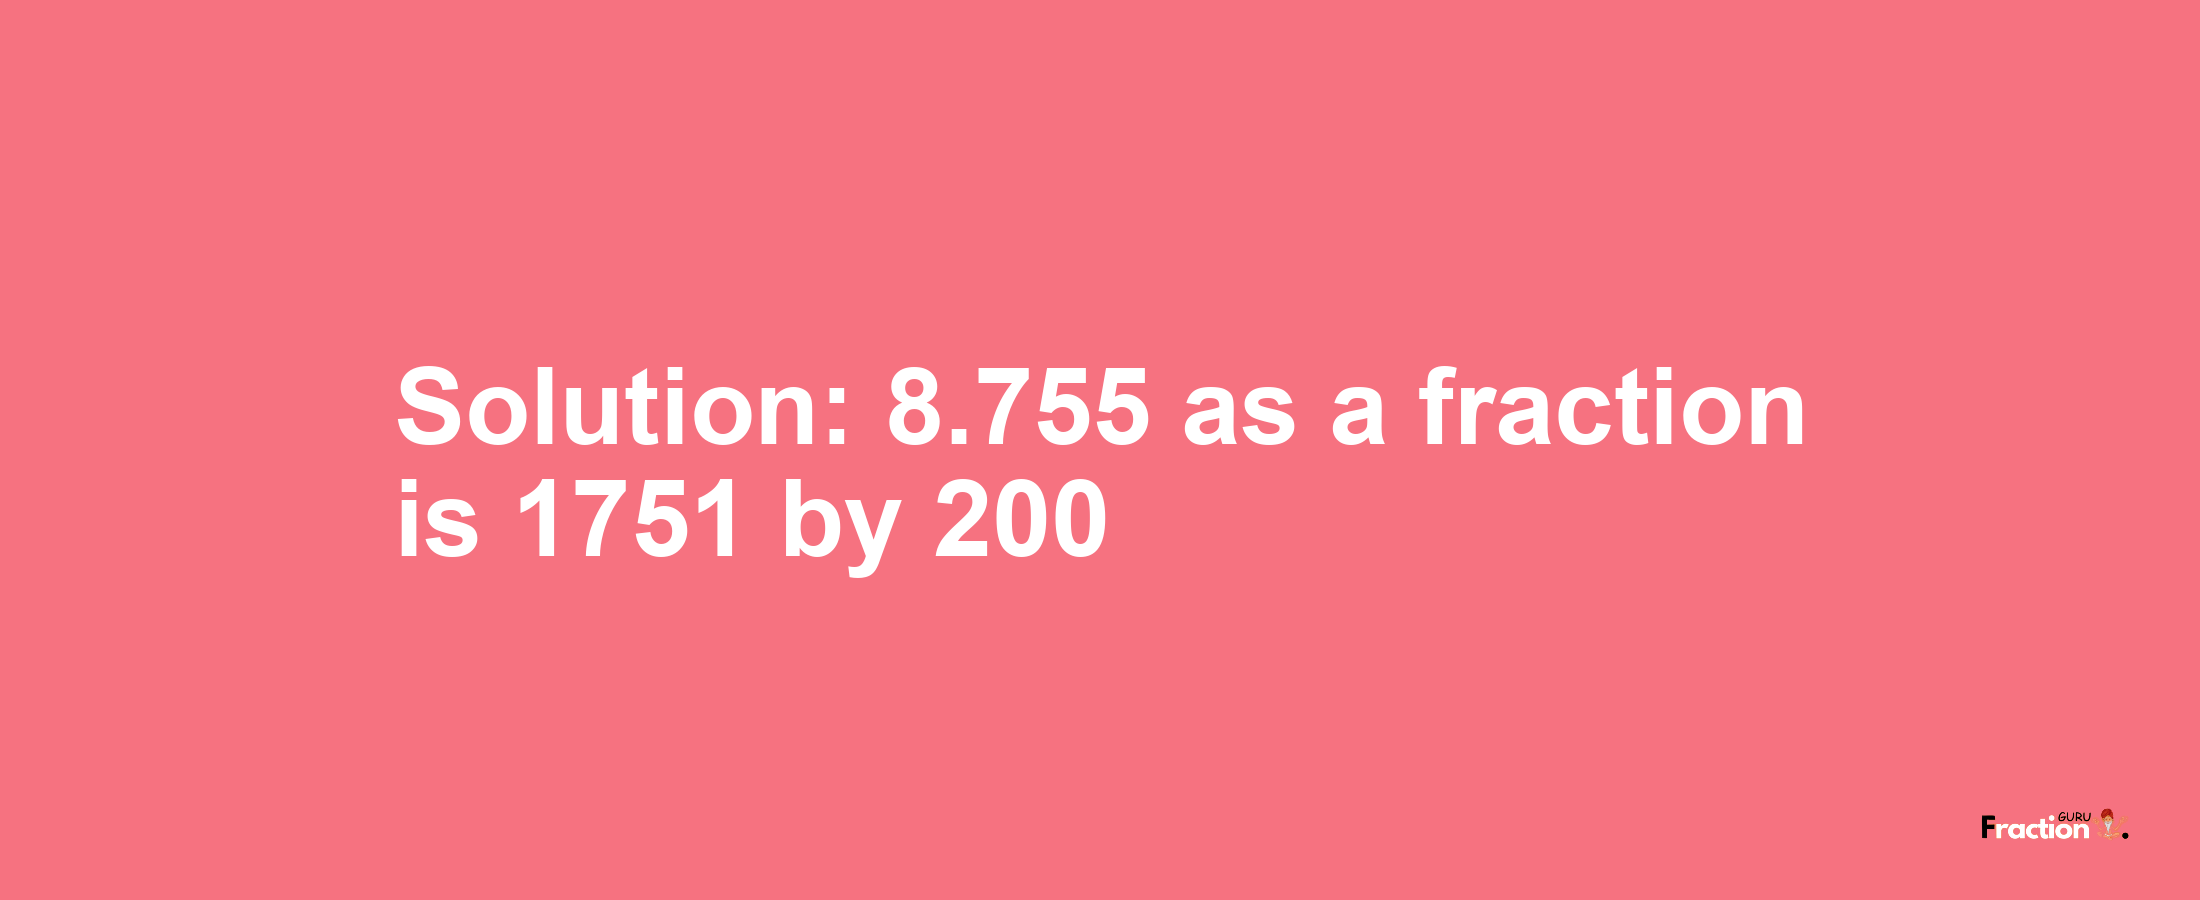 Solution:8.755 as a fraction is 1751/200